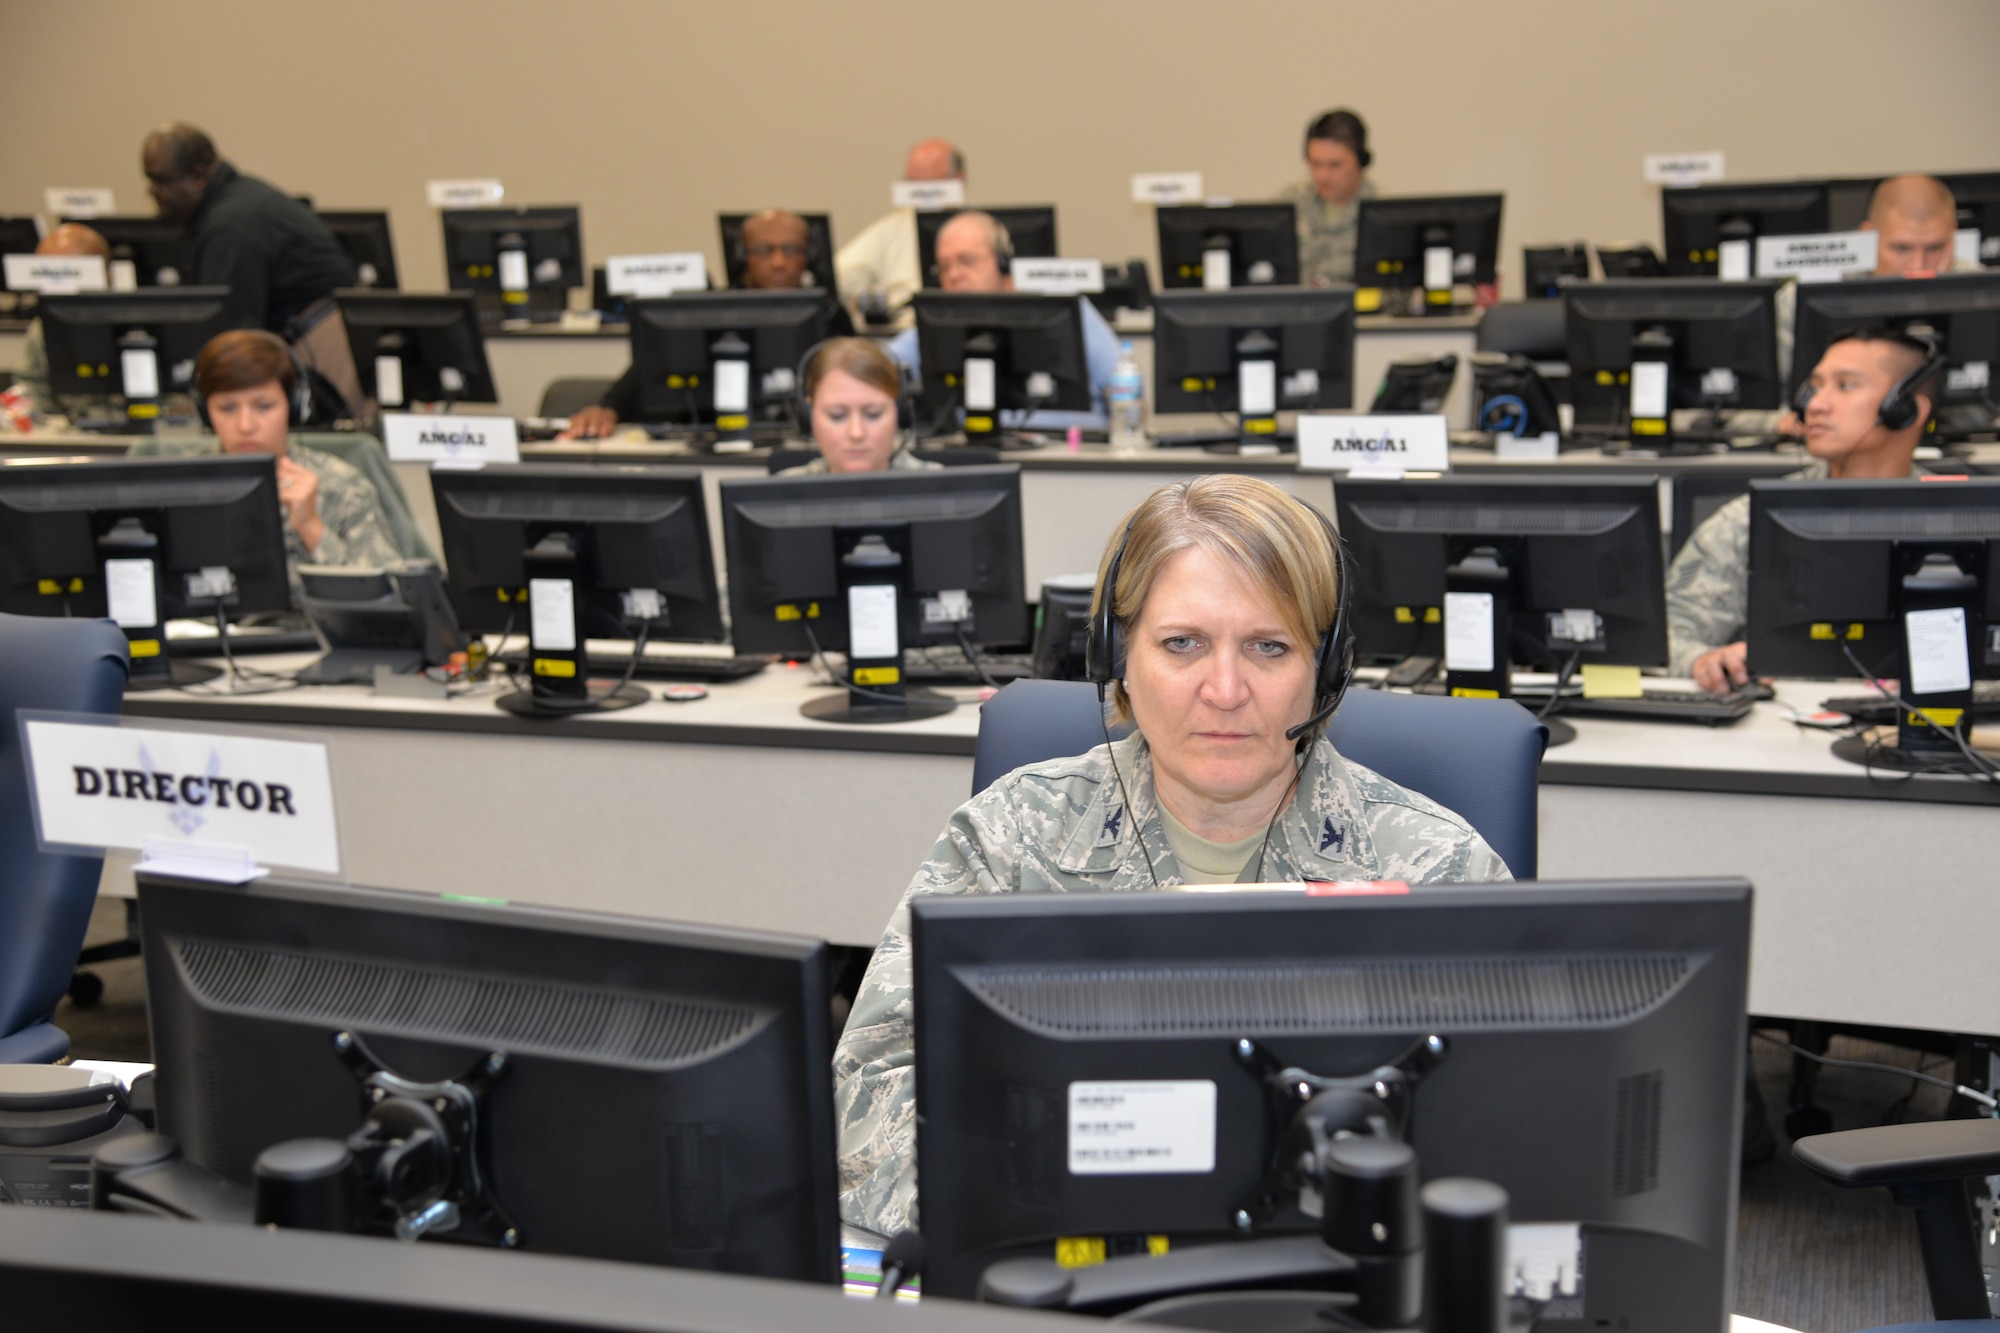 Col. Constance Jenkins, Air Mobility Command Reserve Advisor to the Director of Logistics, Engineering and Force Protection, works in the AMC and 18th Air Force Crisis Battle Staff as Director during Exercise Global Thunder/Vigilant Shield at 18th AF headquarters on Scott Air Force Base, Nov. 5, 2015. The Crisis Battle Staff is a collection of experts drawn from across AMC and 18th AF that activates on a round-the-clock basis to address a specific crisis. The CBS team is supposed to be fully functional within an hour of being recalled to support the 18th AF commander during crises ranging from natural disasters to nuclear war. (U.S. Air Force photo by Master Sgt. Thomas J. Doscher)